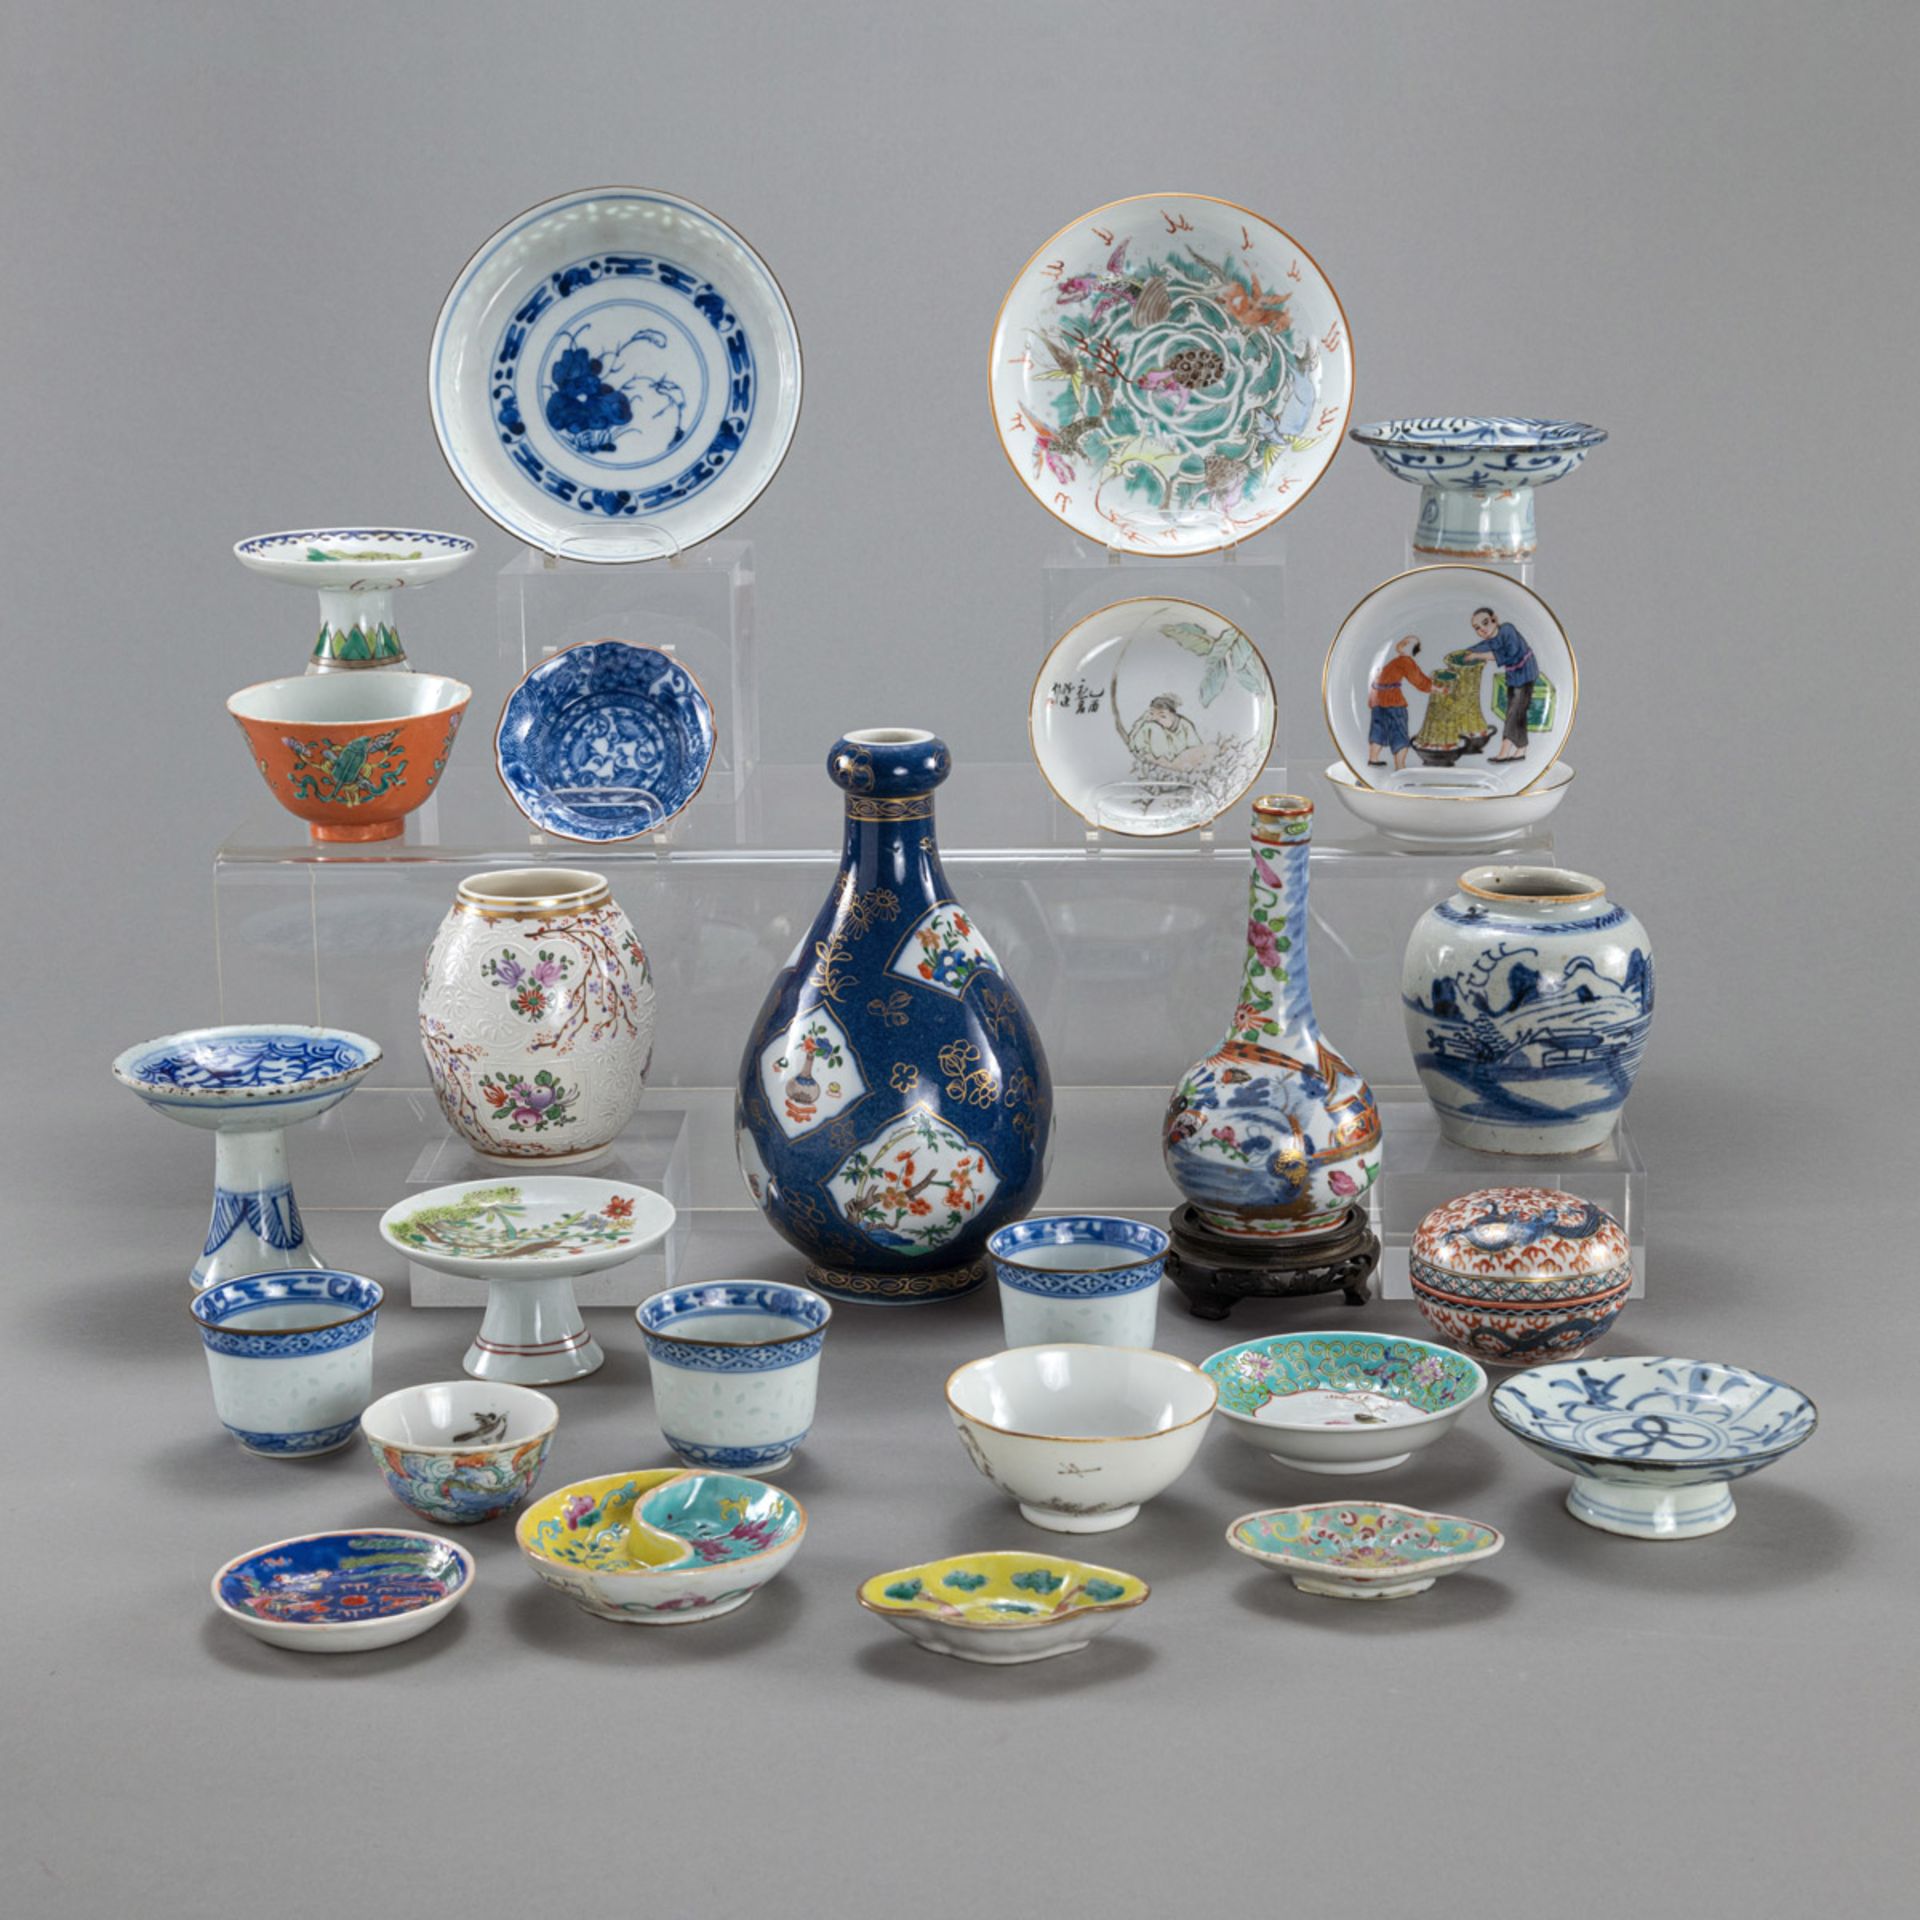 A GROUP OF POLYCHROME PORCELAIN VASES, BOWLS, AND DISHES